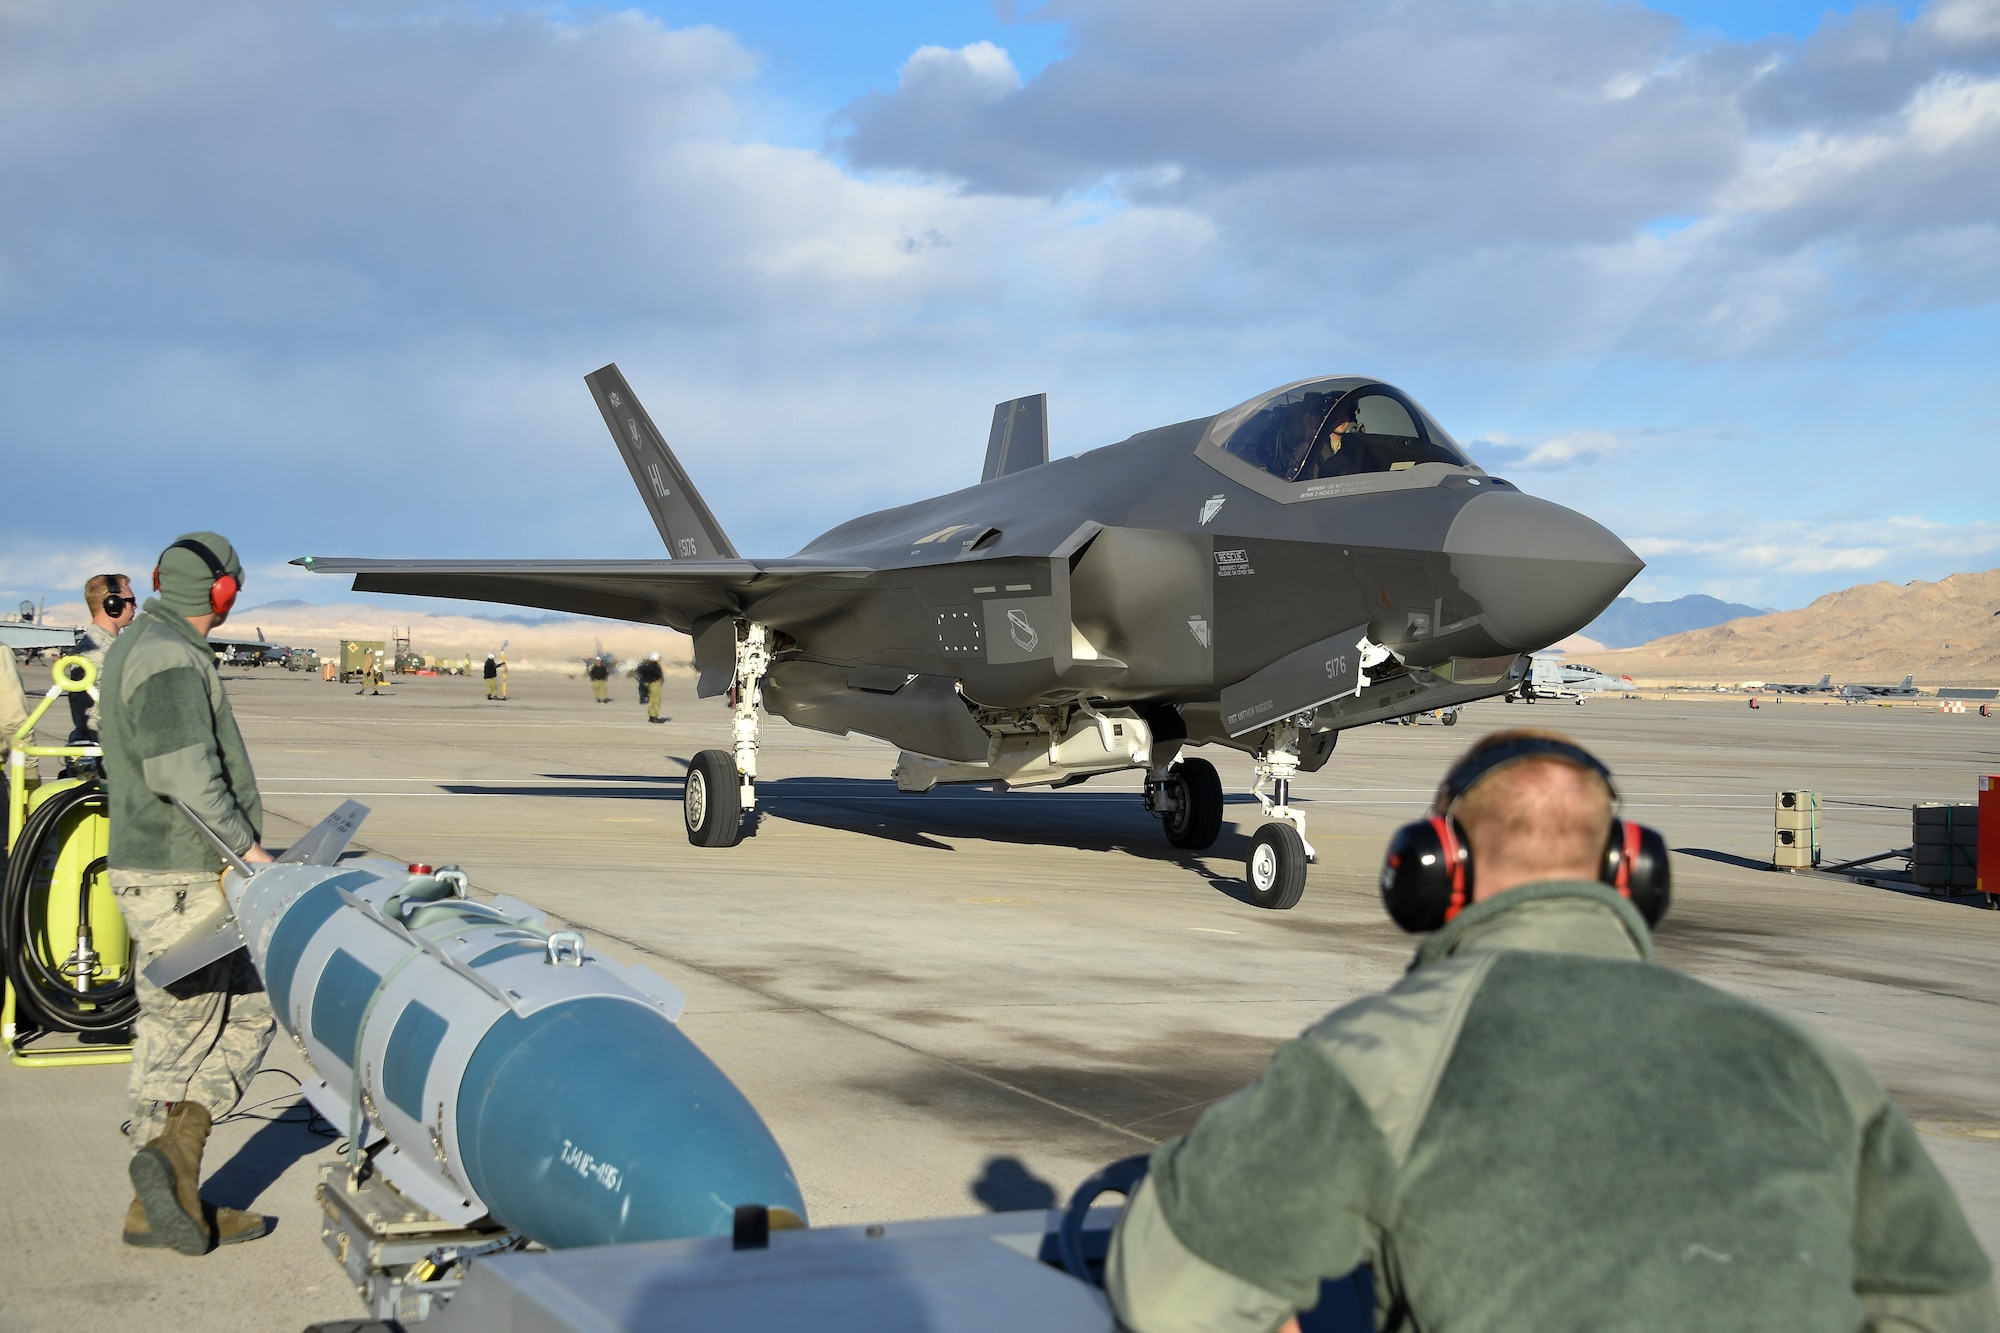 Airmen prepare to load an F-35A prior to a sortie. Pilots and maintainers from the 388th Fighter Wing's 4th Fighter Squadron and 4th Aircraft Maintenance Unit are participating in Red Flag 19-1 at Nellis AFB, Nevada. This is the wing's second Red Flag with the F-35A, America's most advanced multi-role fighter, which brings game-changing stealth, lethality and interoperability to the modern battlefield. Red Flag is the Air Force's premier combat exercise and includes units from across the Air Force and allied nations. The 388th is the lead wing for Red Flag 19-1. (U.S. Air Force photo by R. Nial Bradshaw)